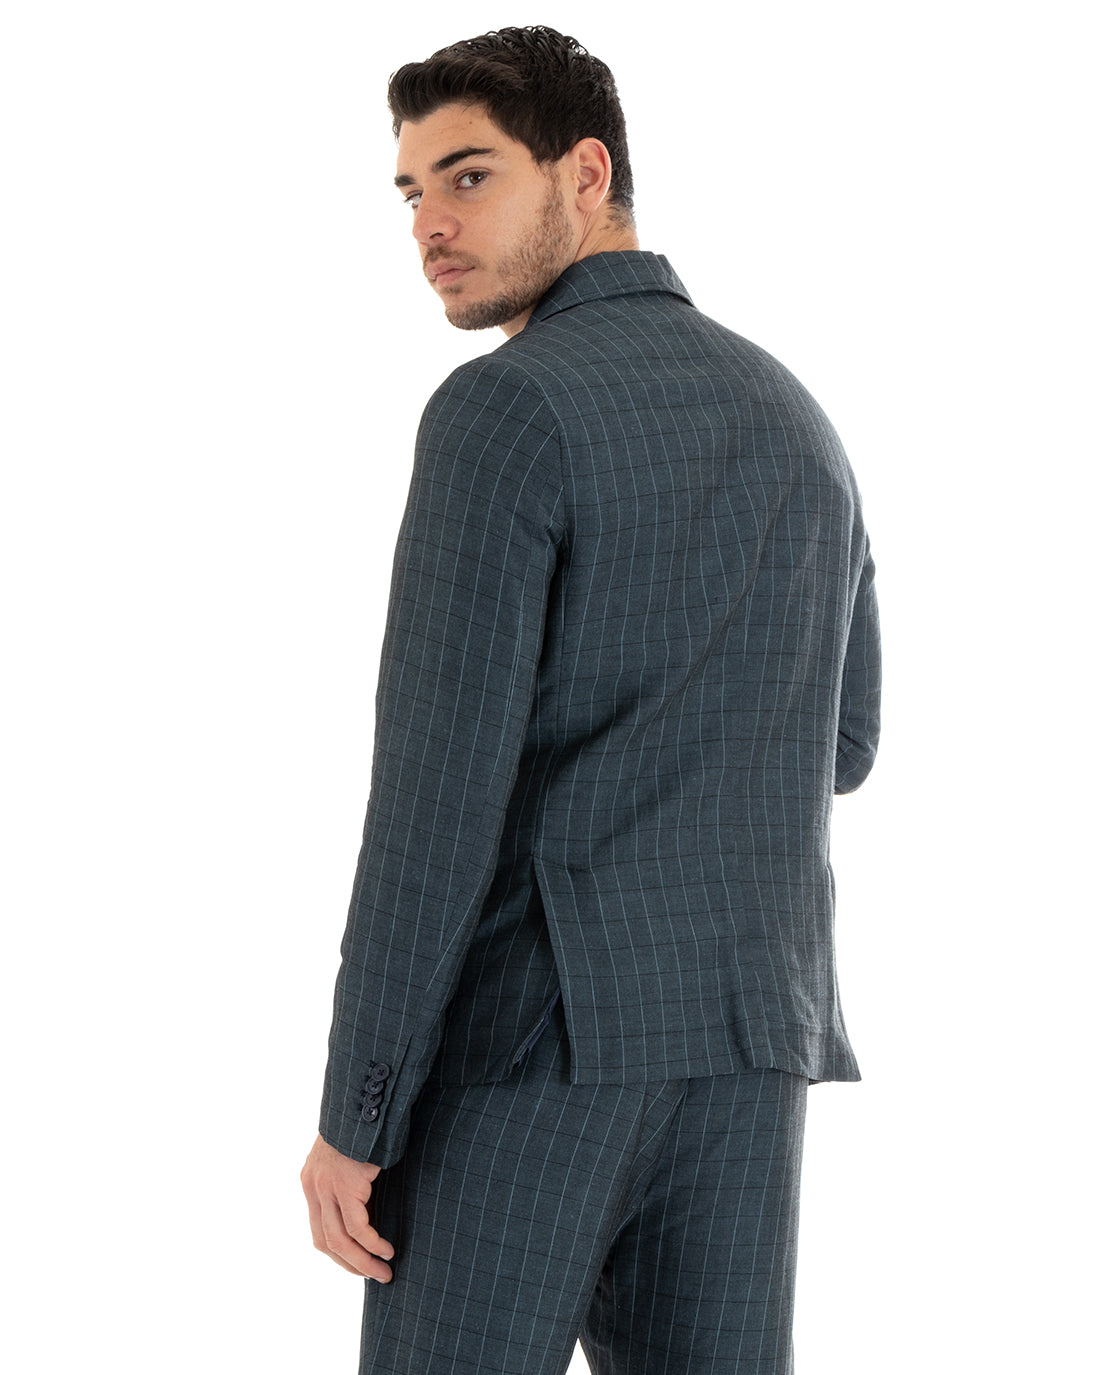 Single-breasted Linen Men's Jacket Checked Brown Ceremony Elegant Casual GIOSAL-G2850A